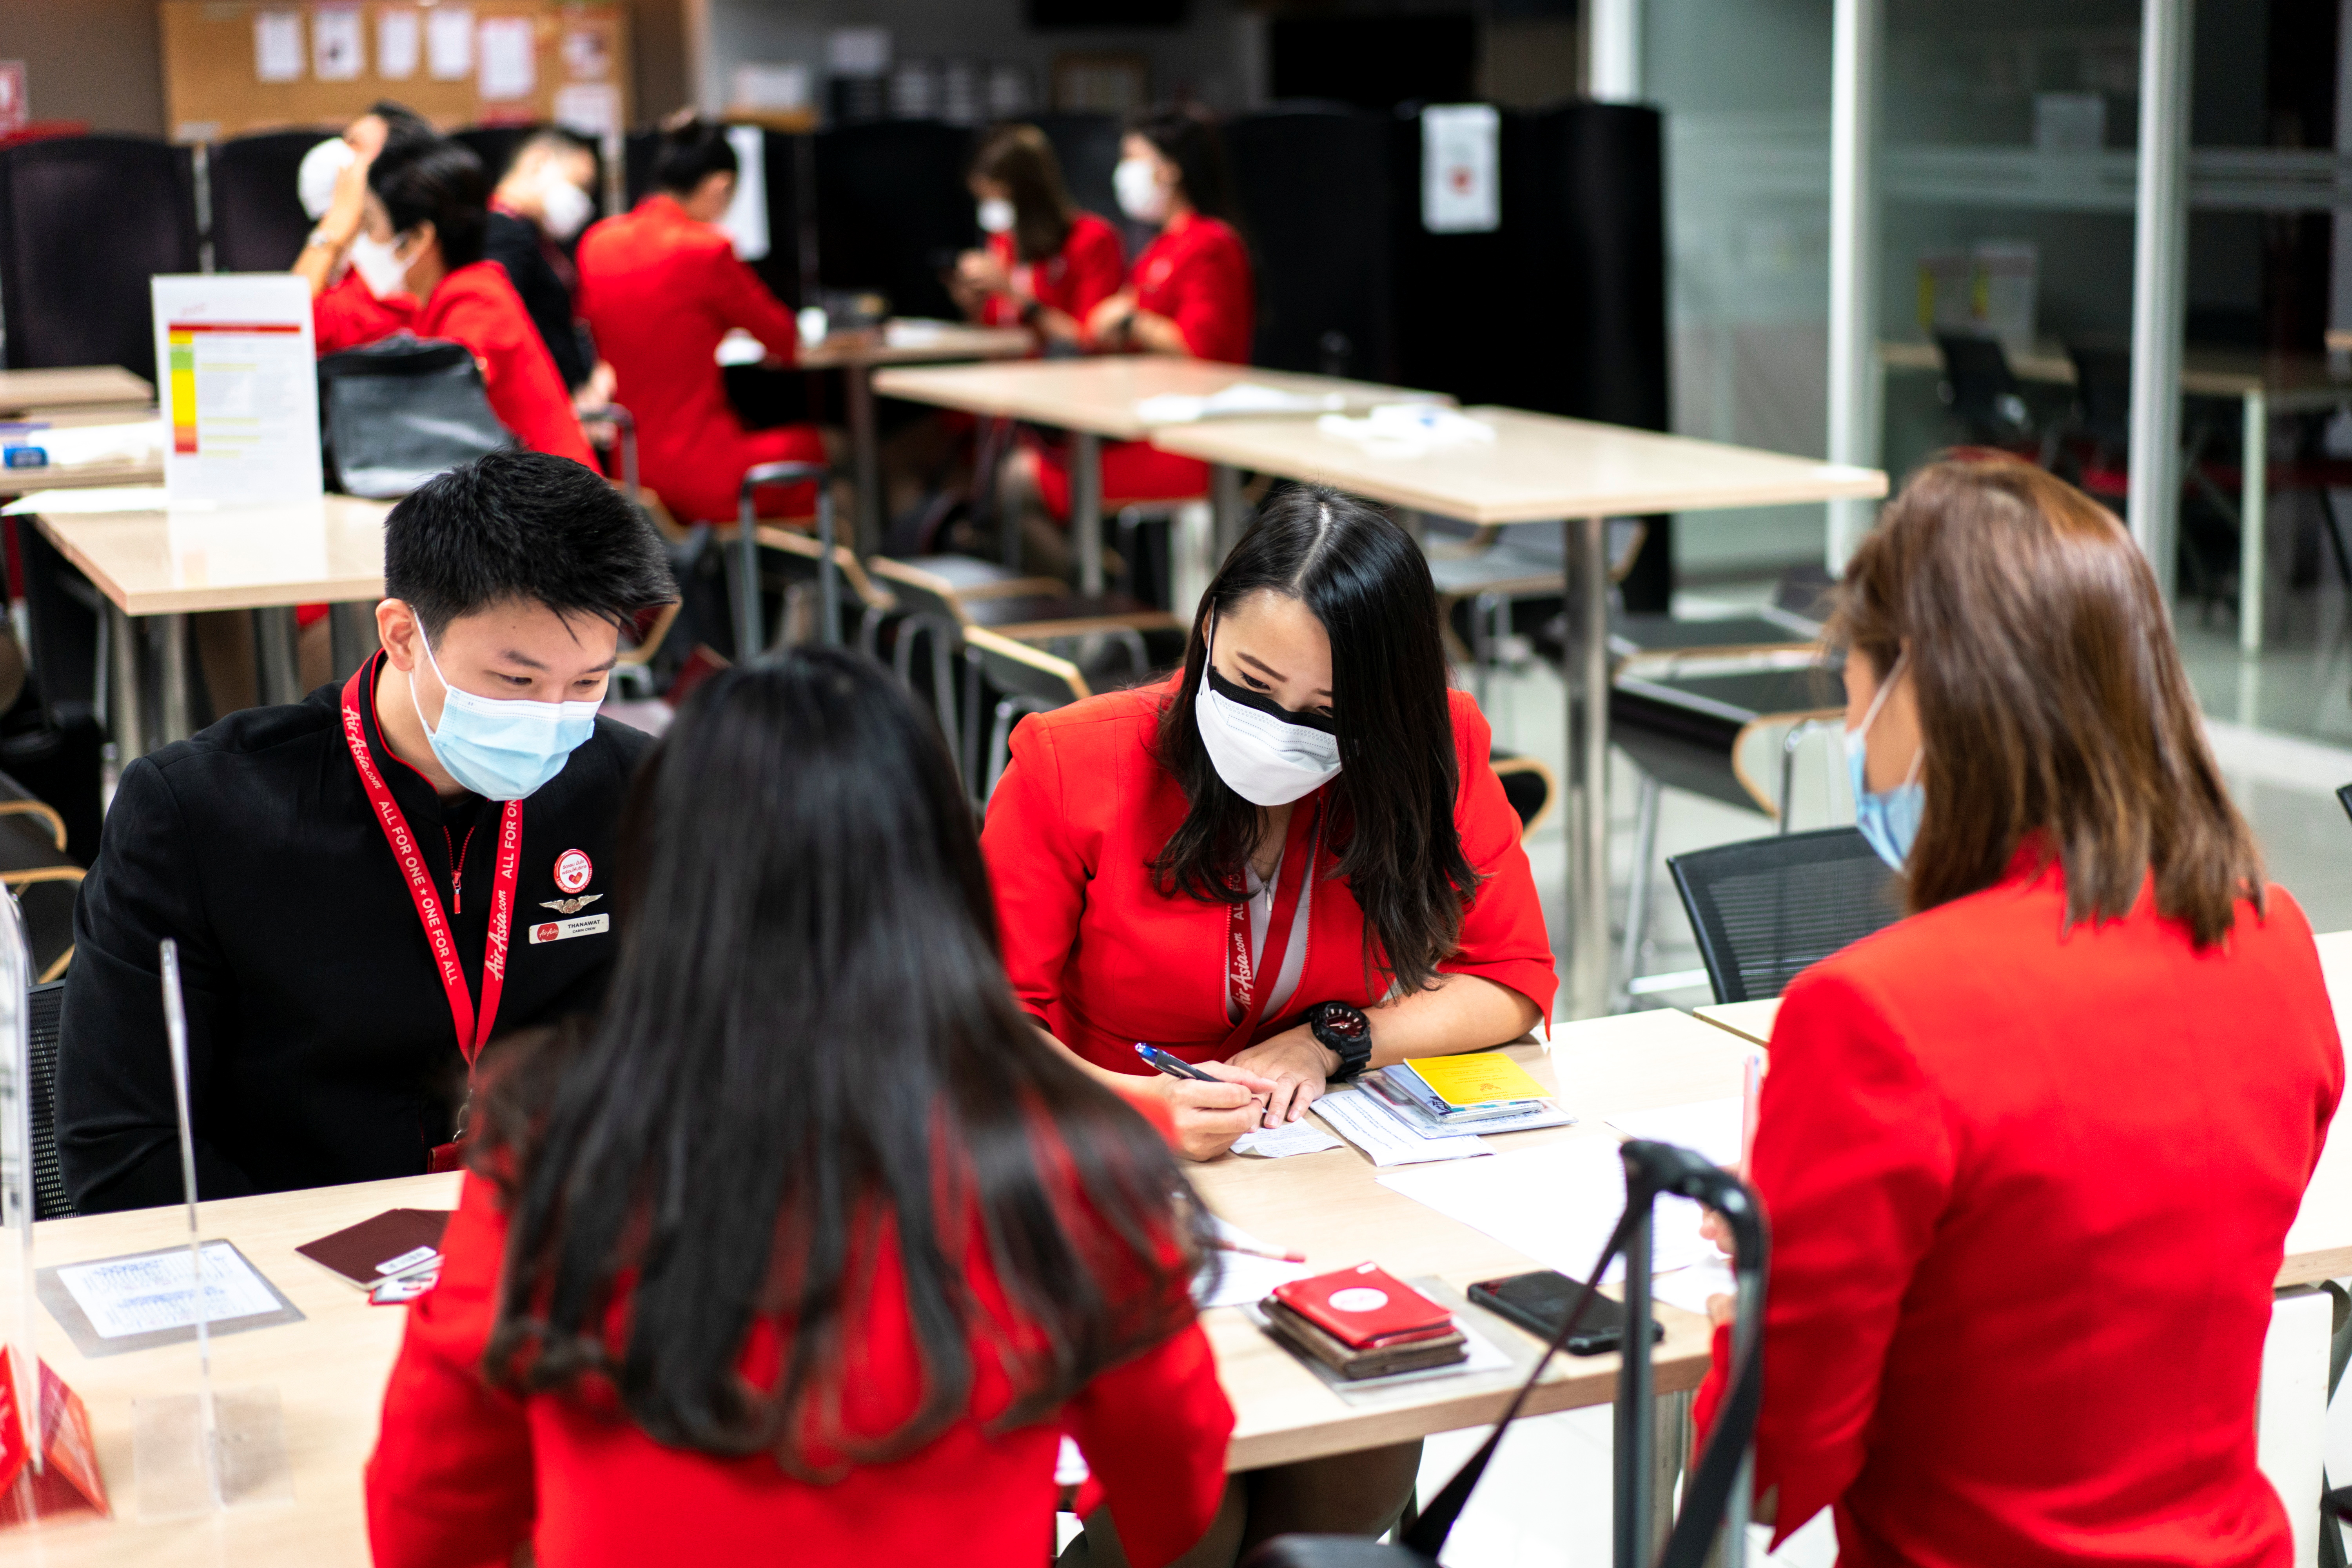 Thai AirAsia cabin crew members wearing masks to prevent the spread of the coronavirus disease (COVID-19) study their domestic routes ahead of their flights, at Bangkok's Don Muang International Airport, Thailand, October 27, 2021. REUTERS/Athit Perawongmetha